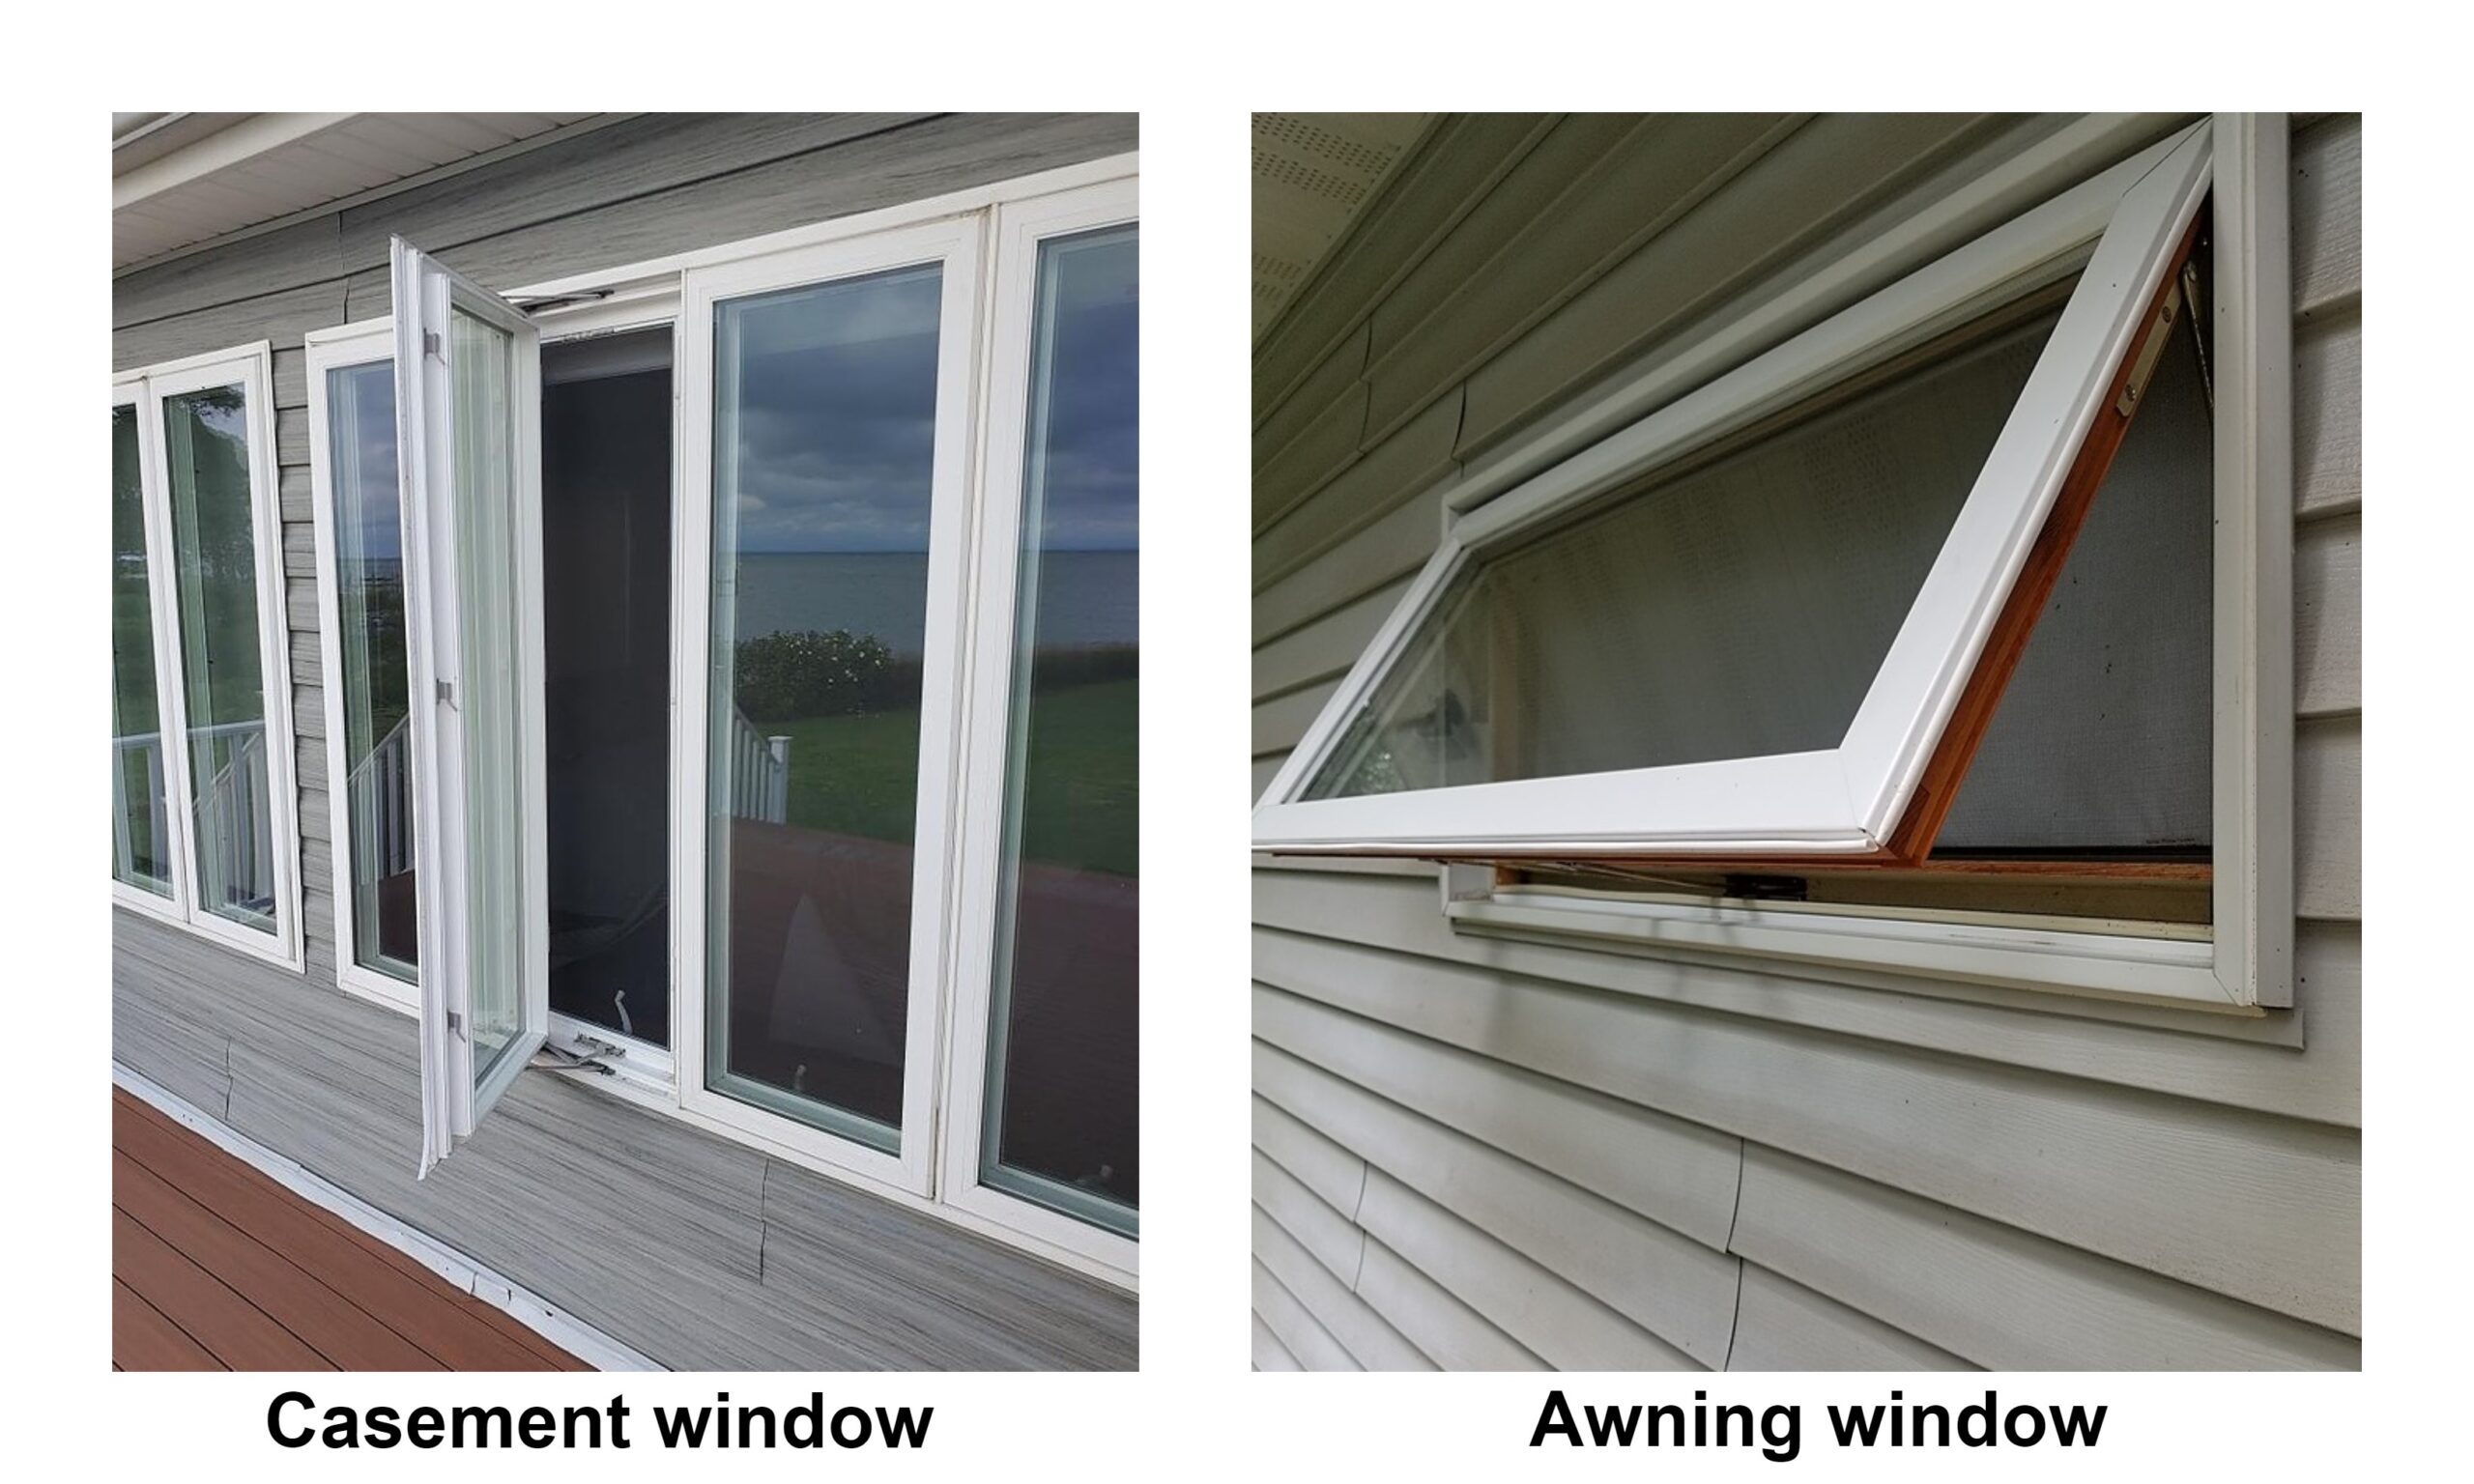 Awning Windows vs Casement: What to Choose for Your Home?